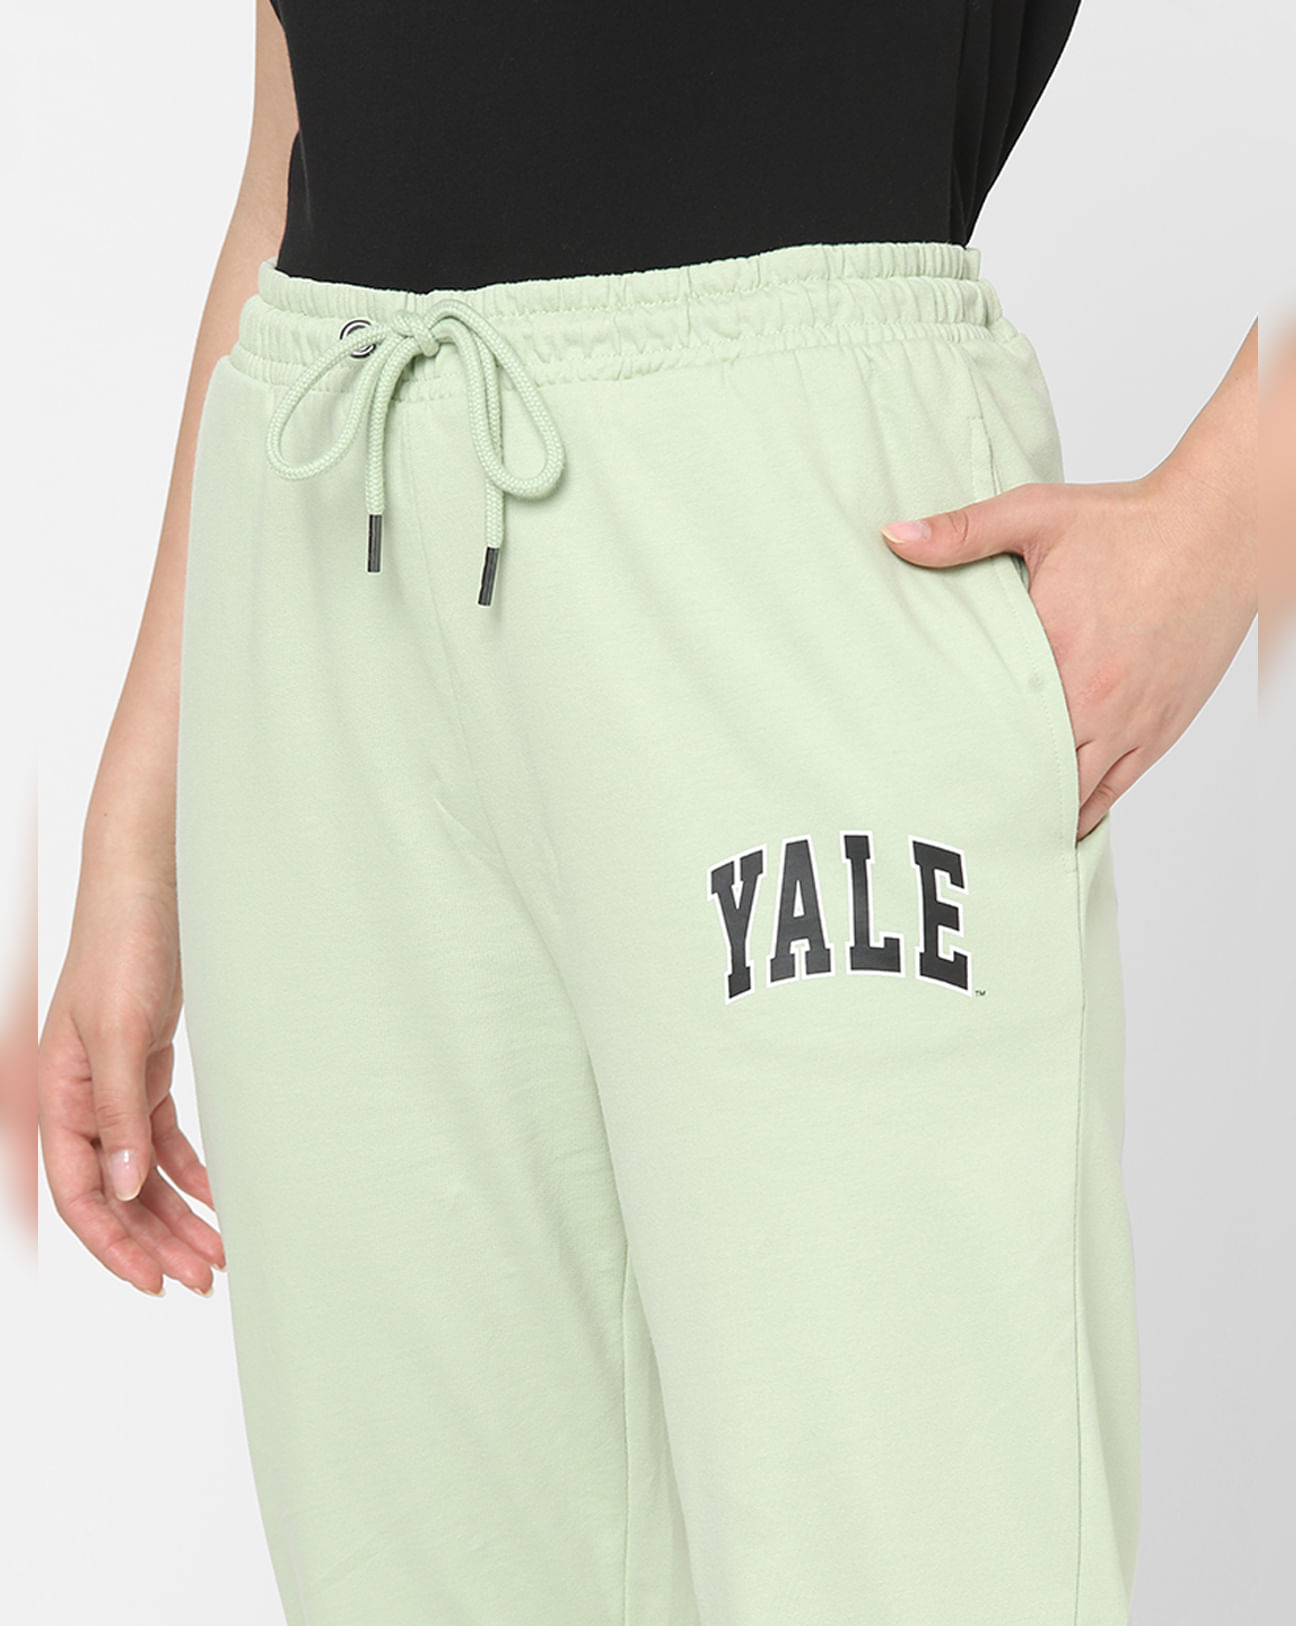 Buy Green High Rise Joggers for Women Online